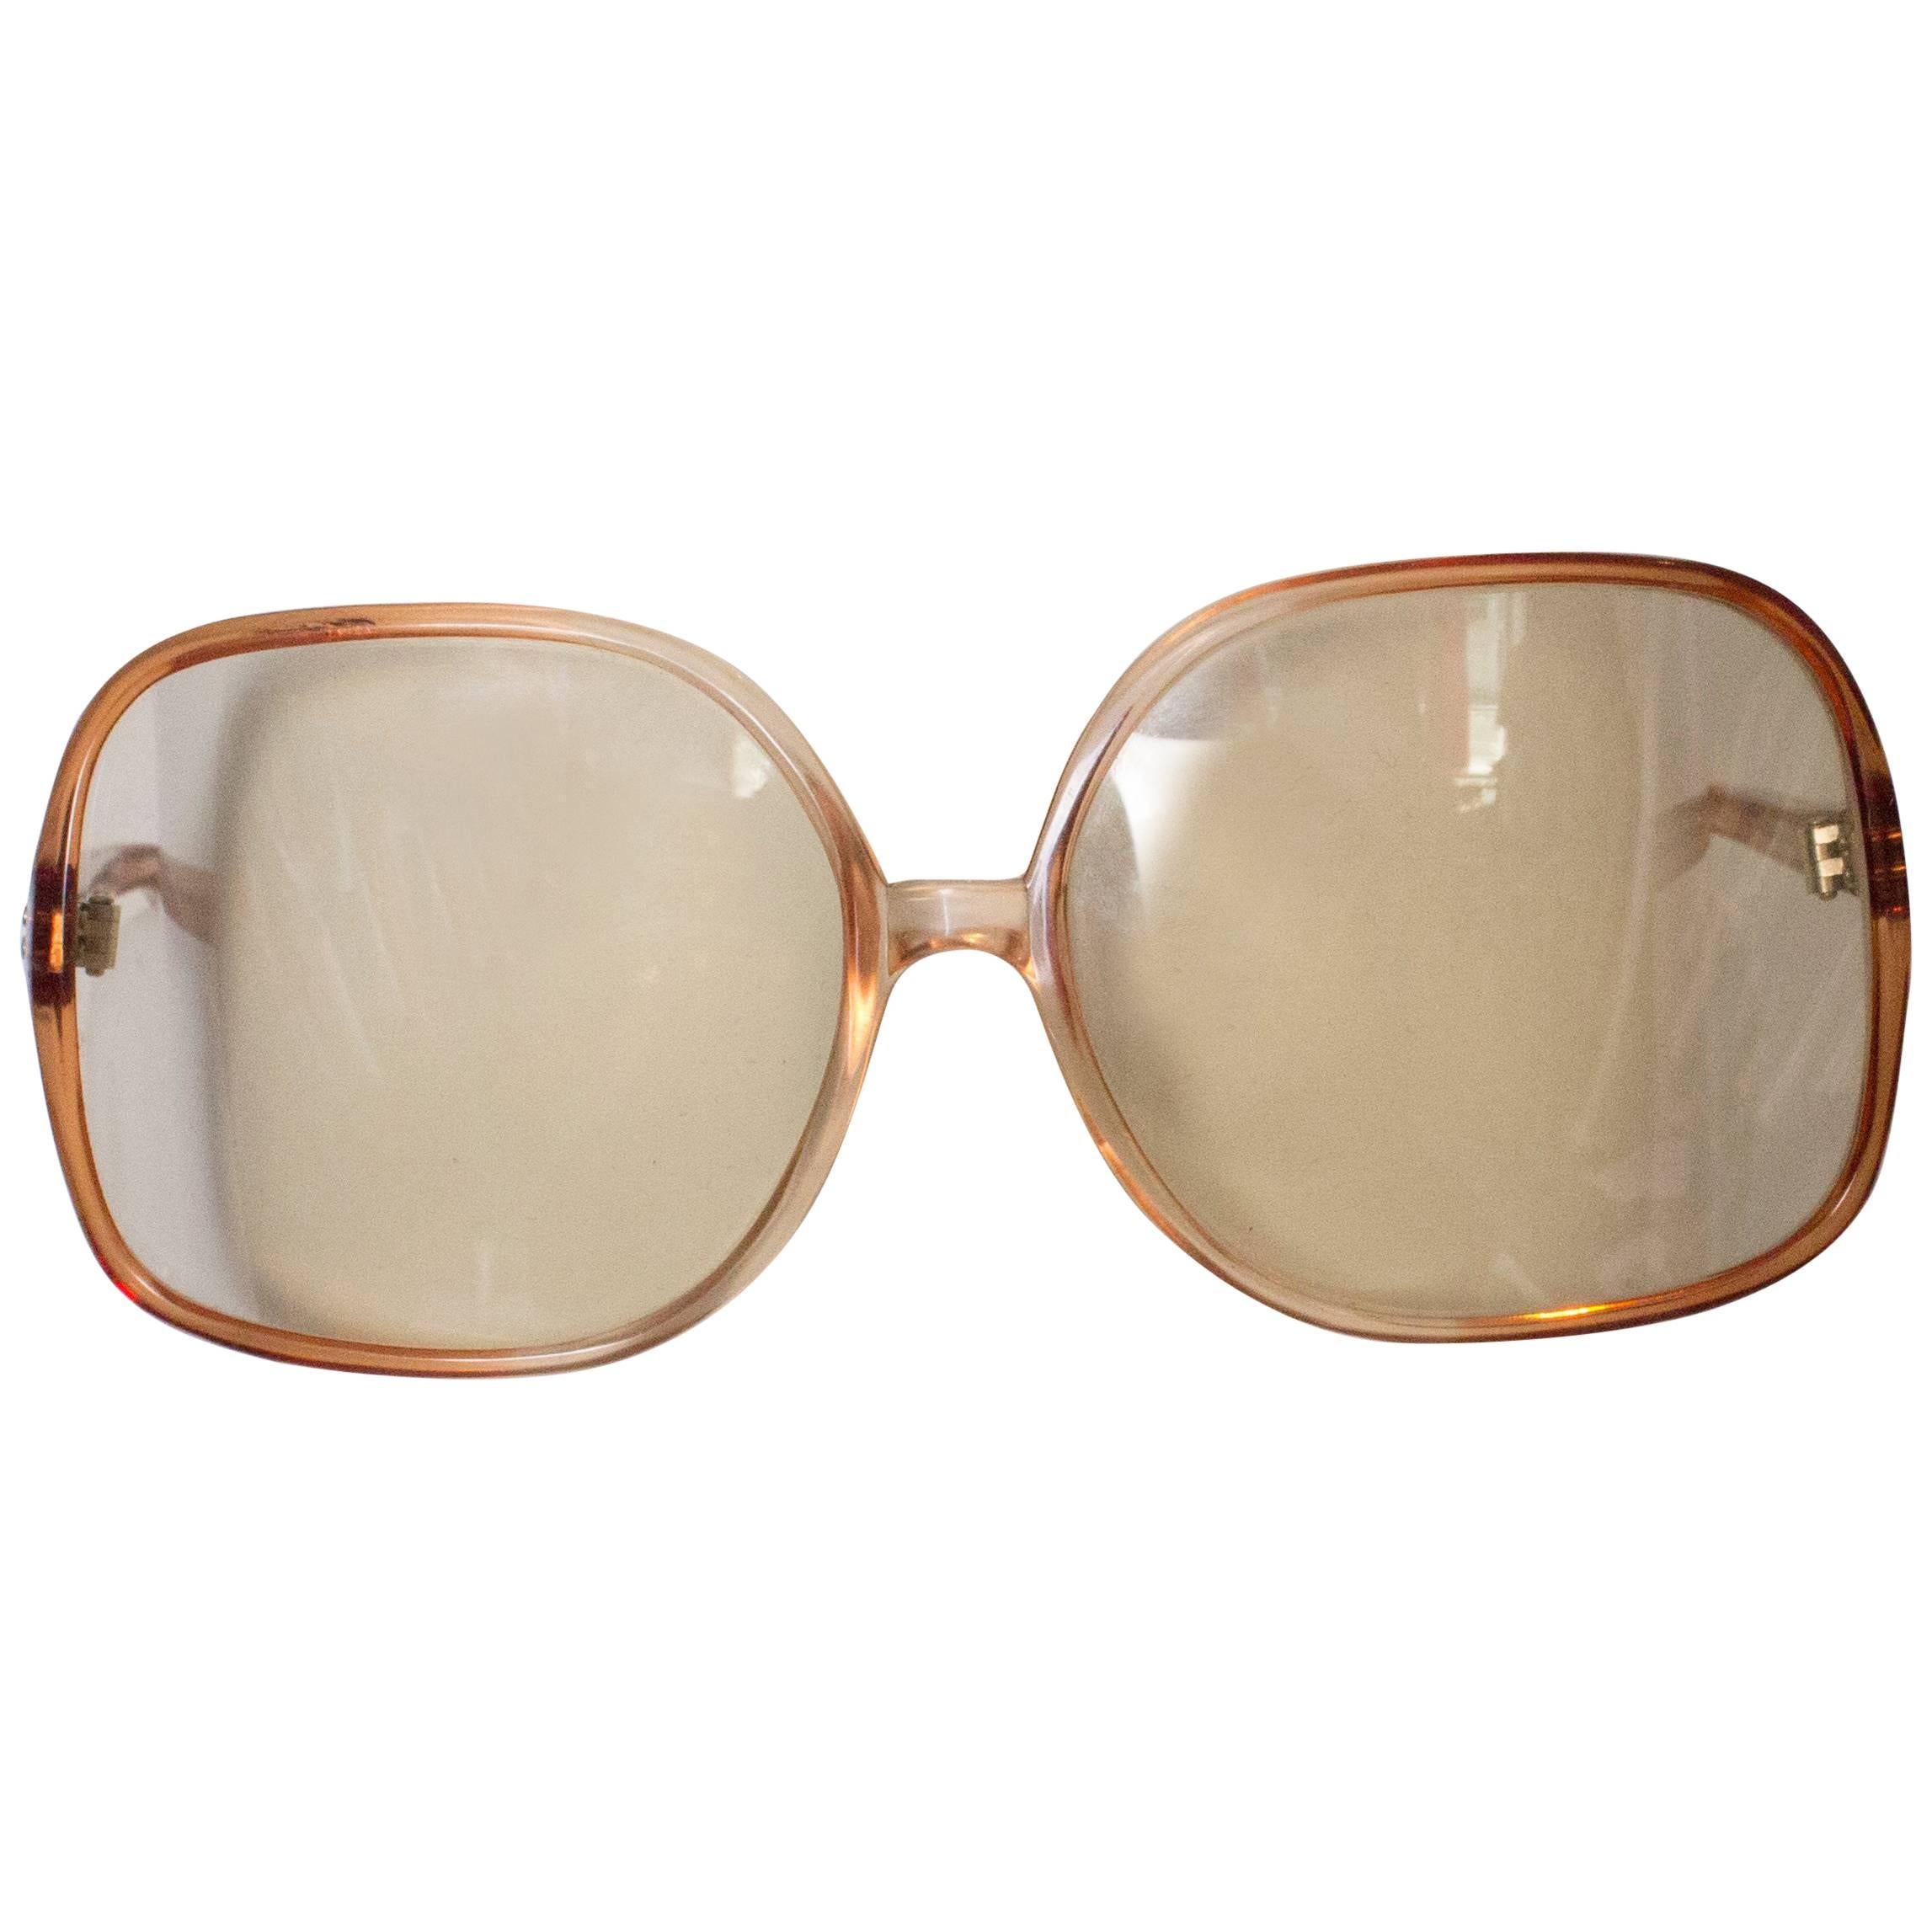 A pair of Vintage 1970s Sunglasses in a Bronze Coloured Frame